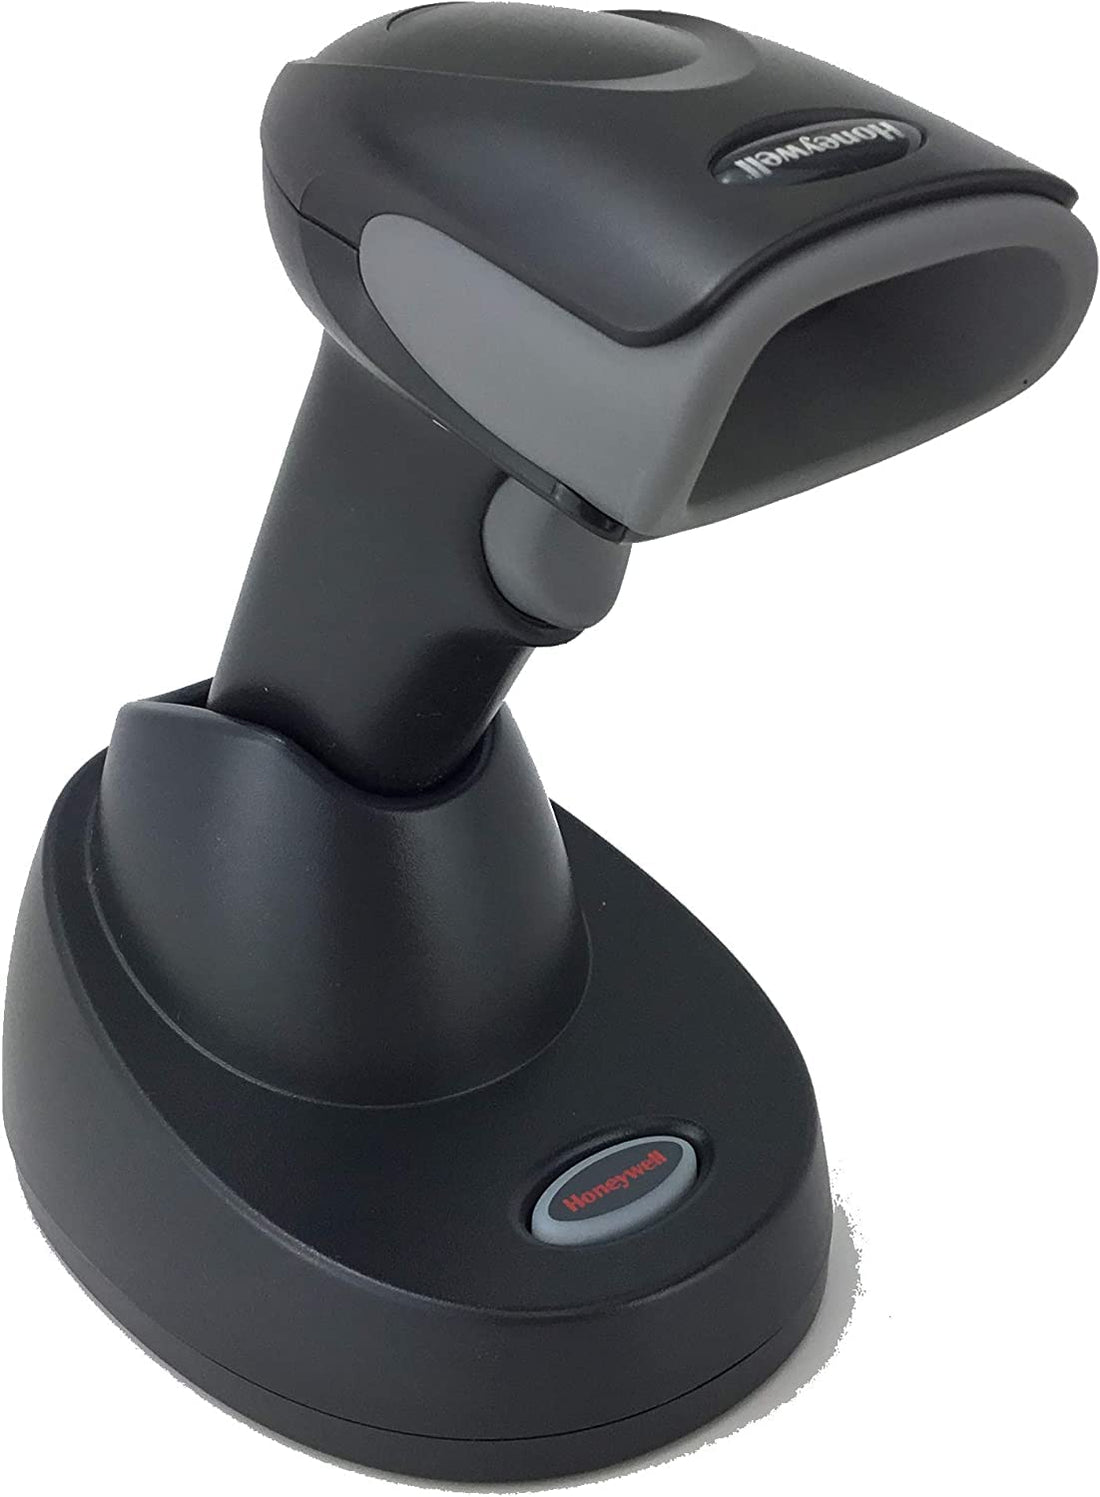 Honeywell Voyager 147x Series Cordless Handheld Bluetooth Area-Imaging Barcode Scanner Kit (2D, 1D, PDF, Postal),Including Charging and Communication Cradle Base and USB Cable,Black